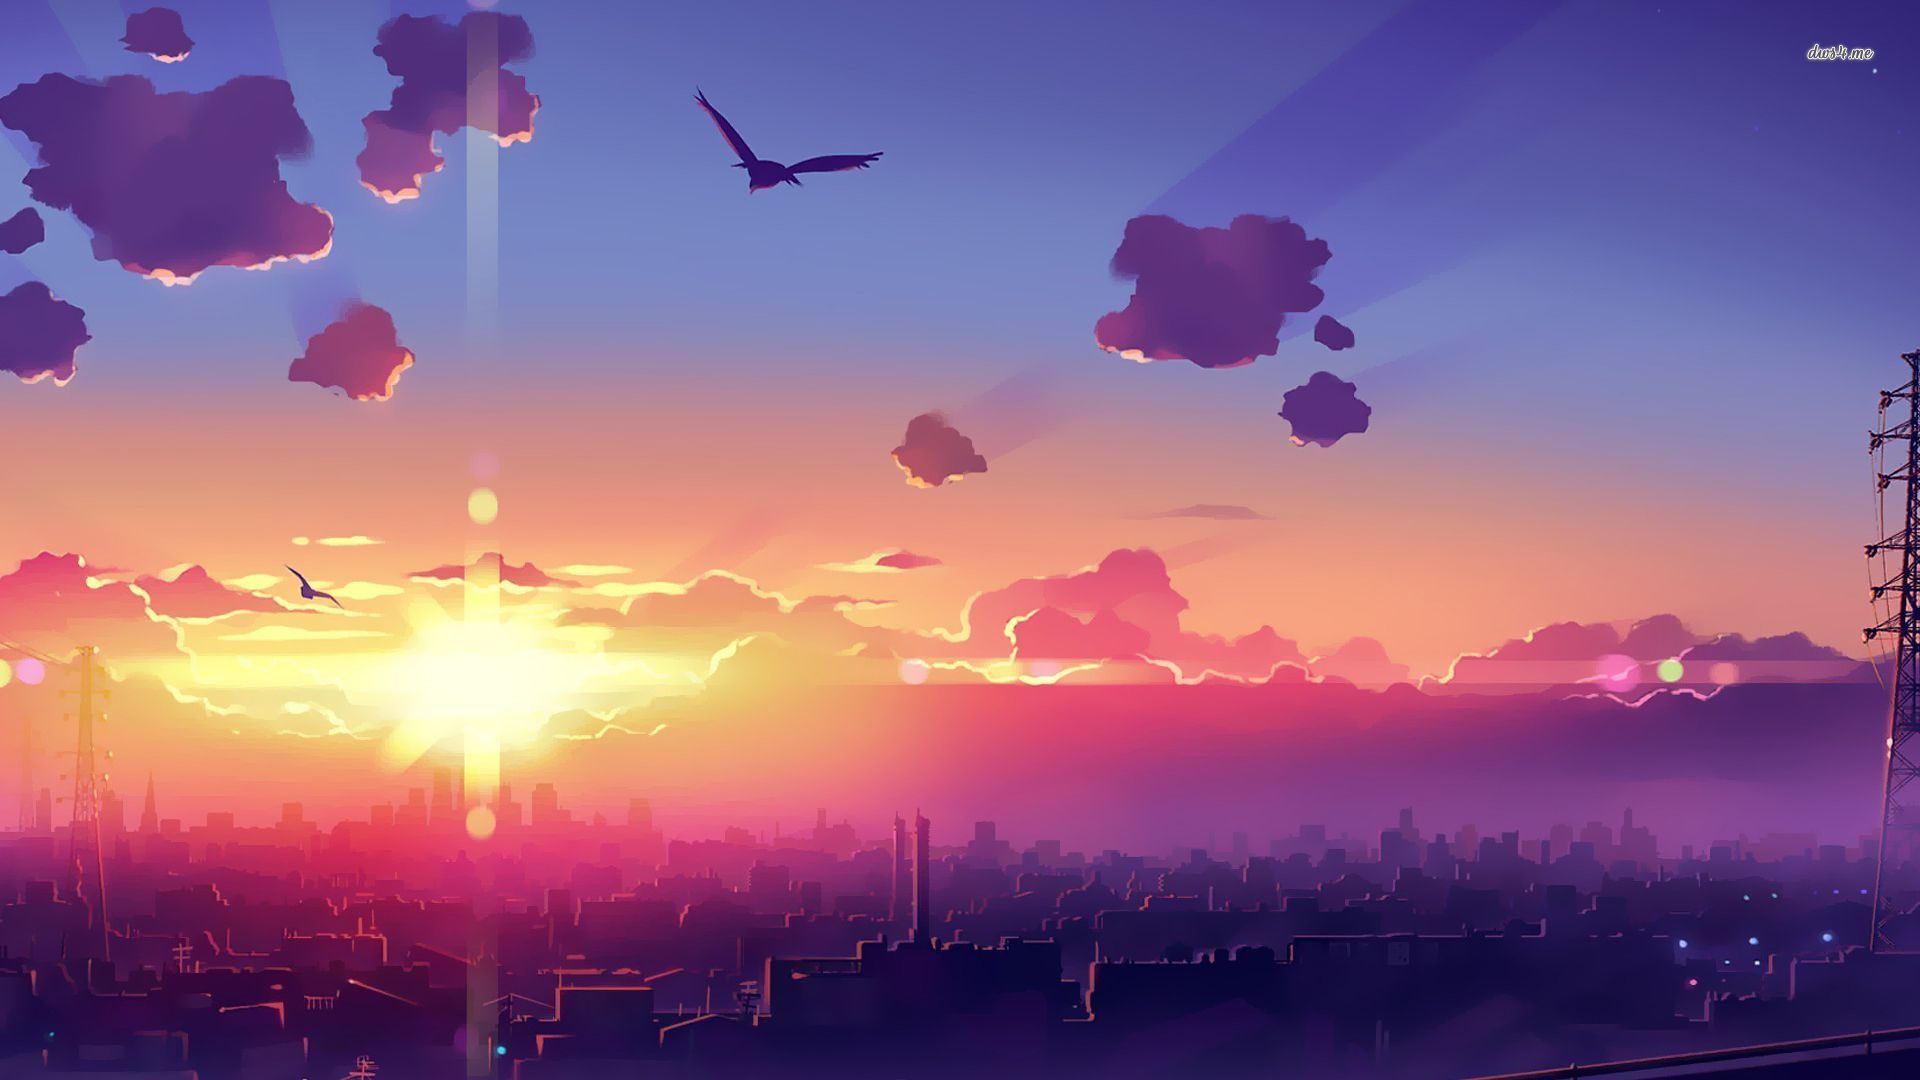 Amazing sunset above the city wallpaper - Anime wallpapers